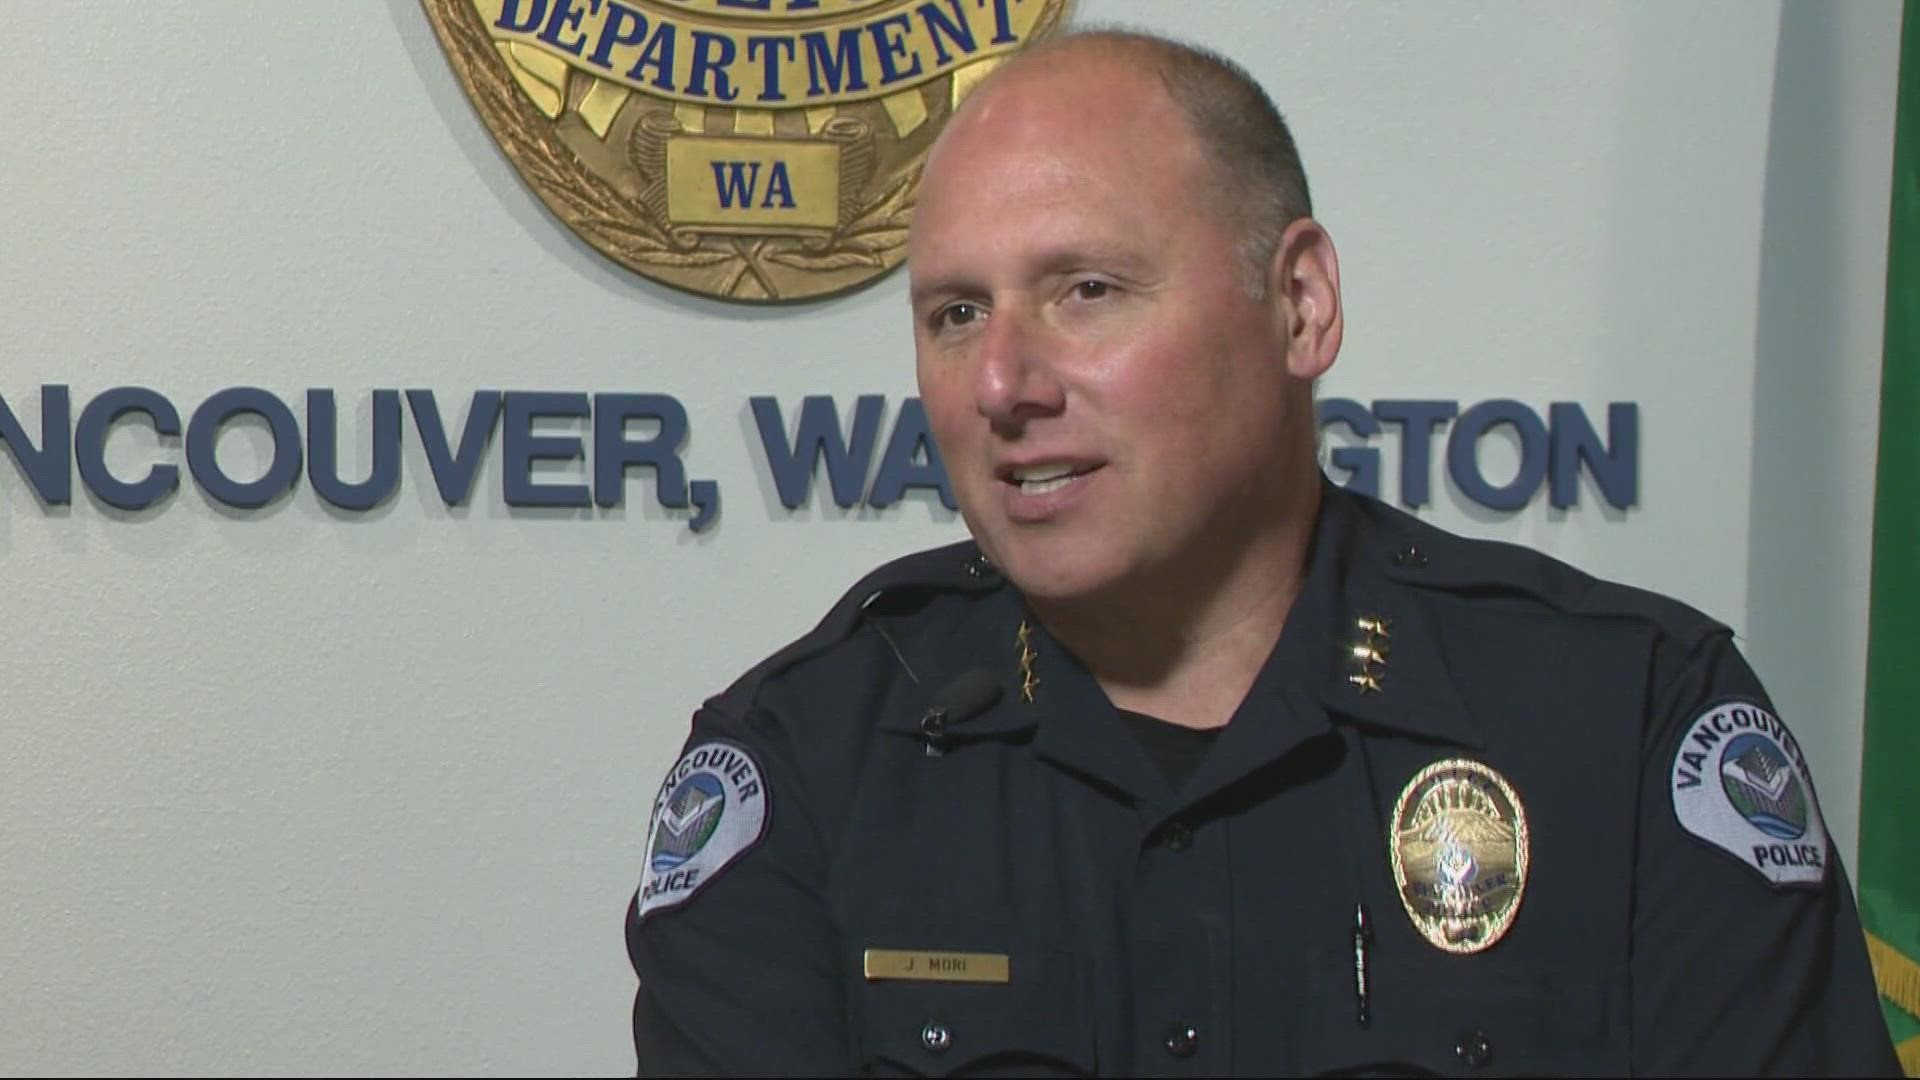 KGW’s Galen Ettlin sat down to talk with police chief Jeff Mori. He’s starting things off with a hiring blitz, and looking to build a more diverse force.